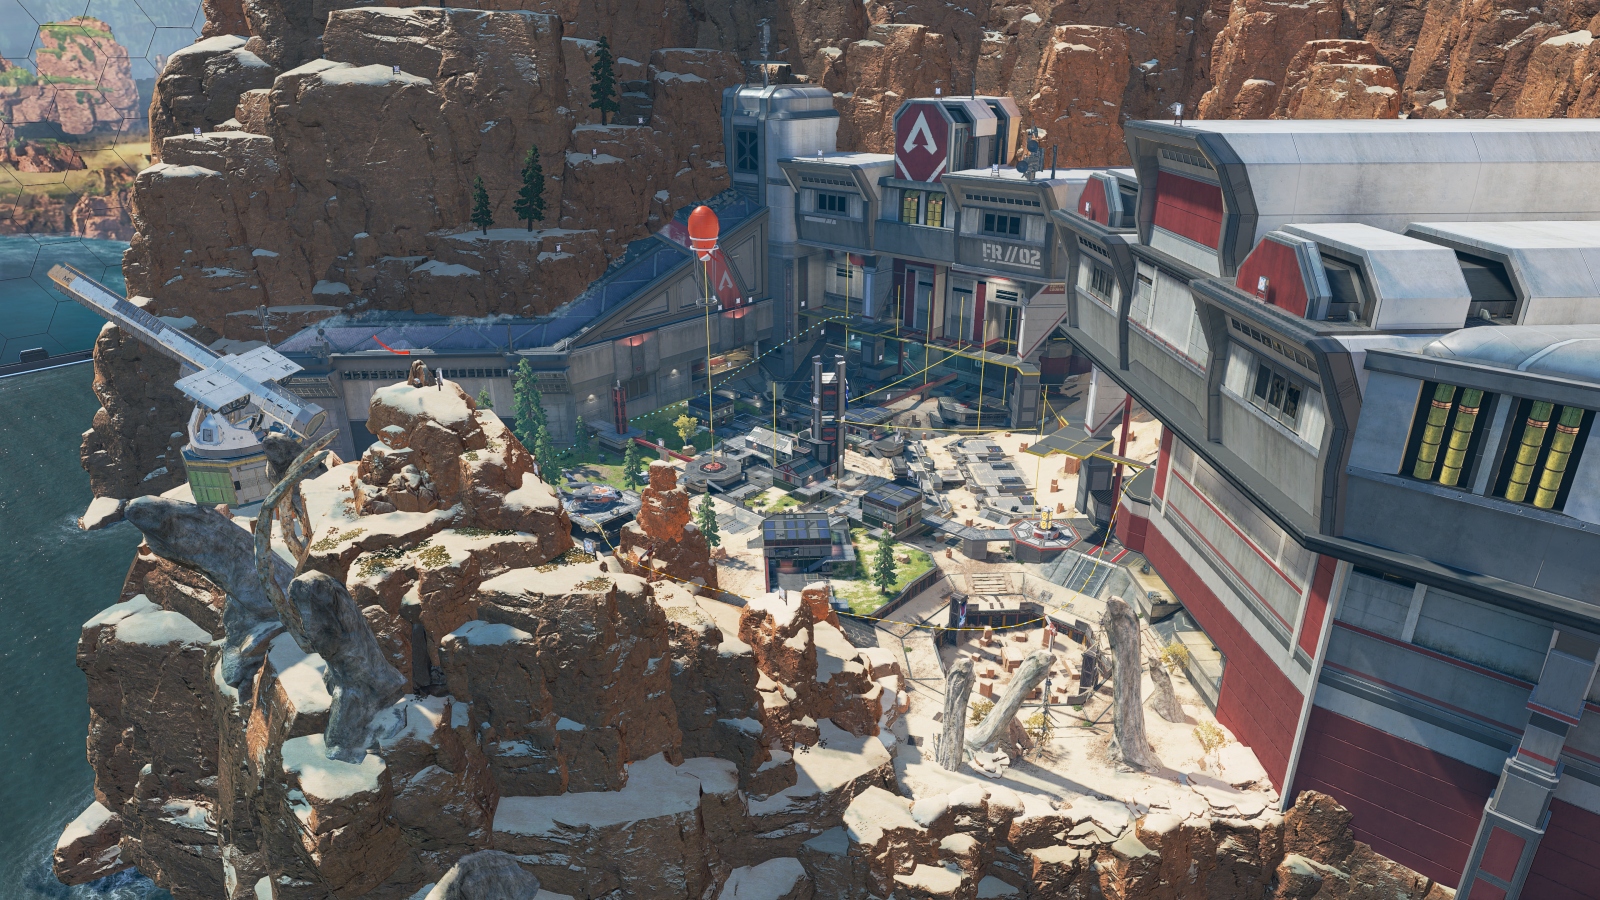 Apex Legends Firing Range undergoes an overhaul in Season 17 with a new map, 1v1 pit, and action gameplay